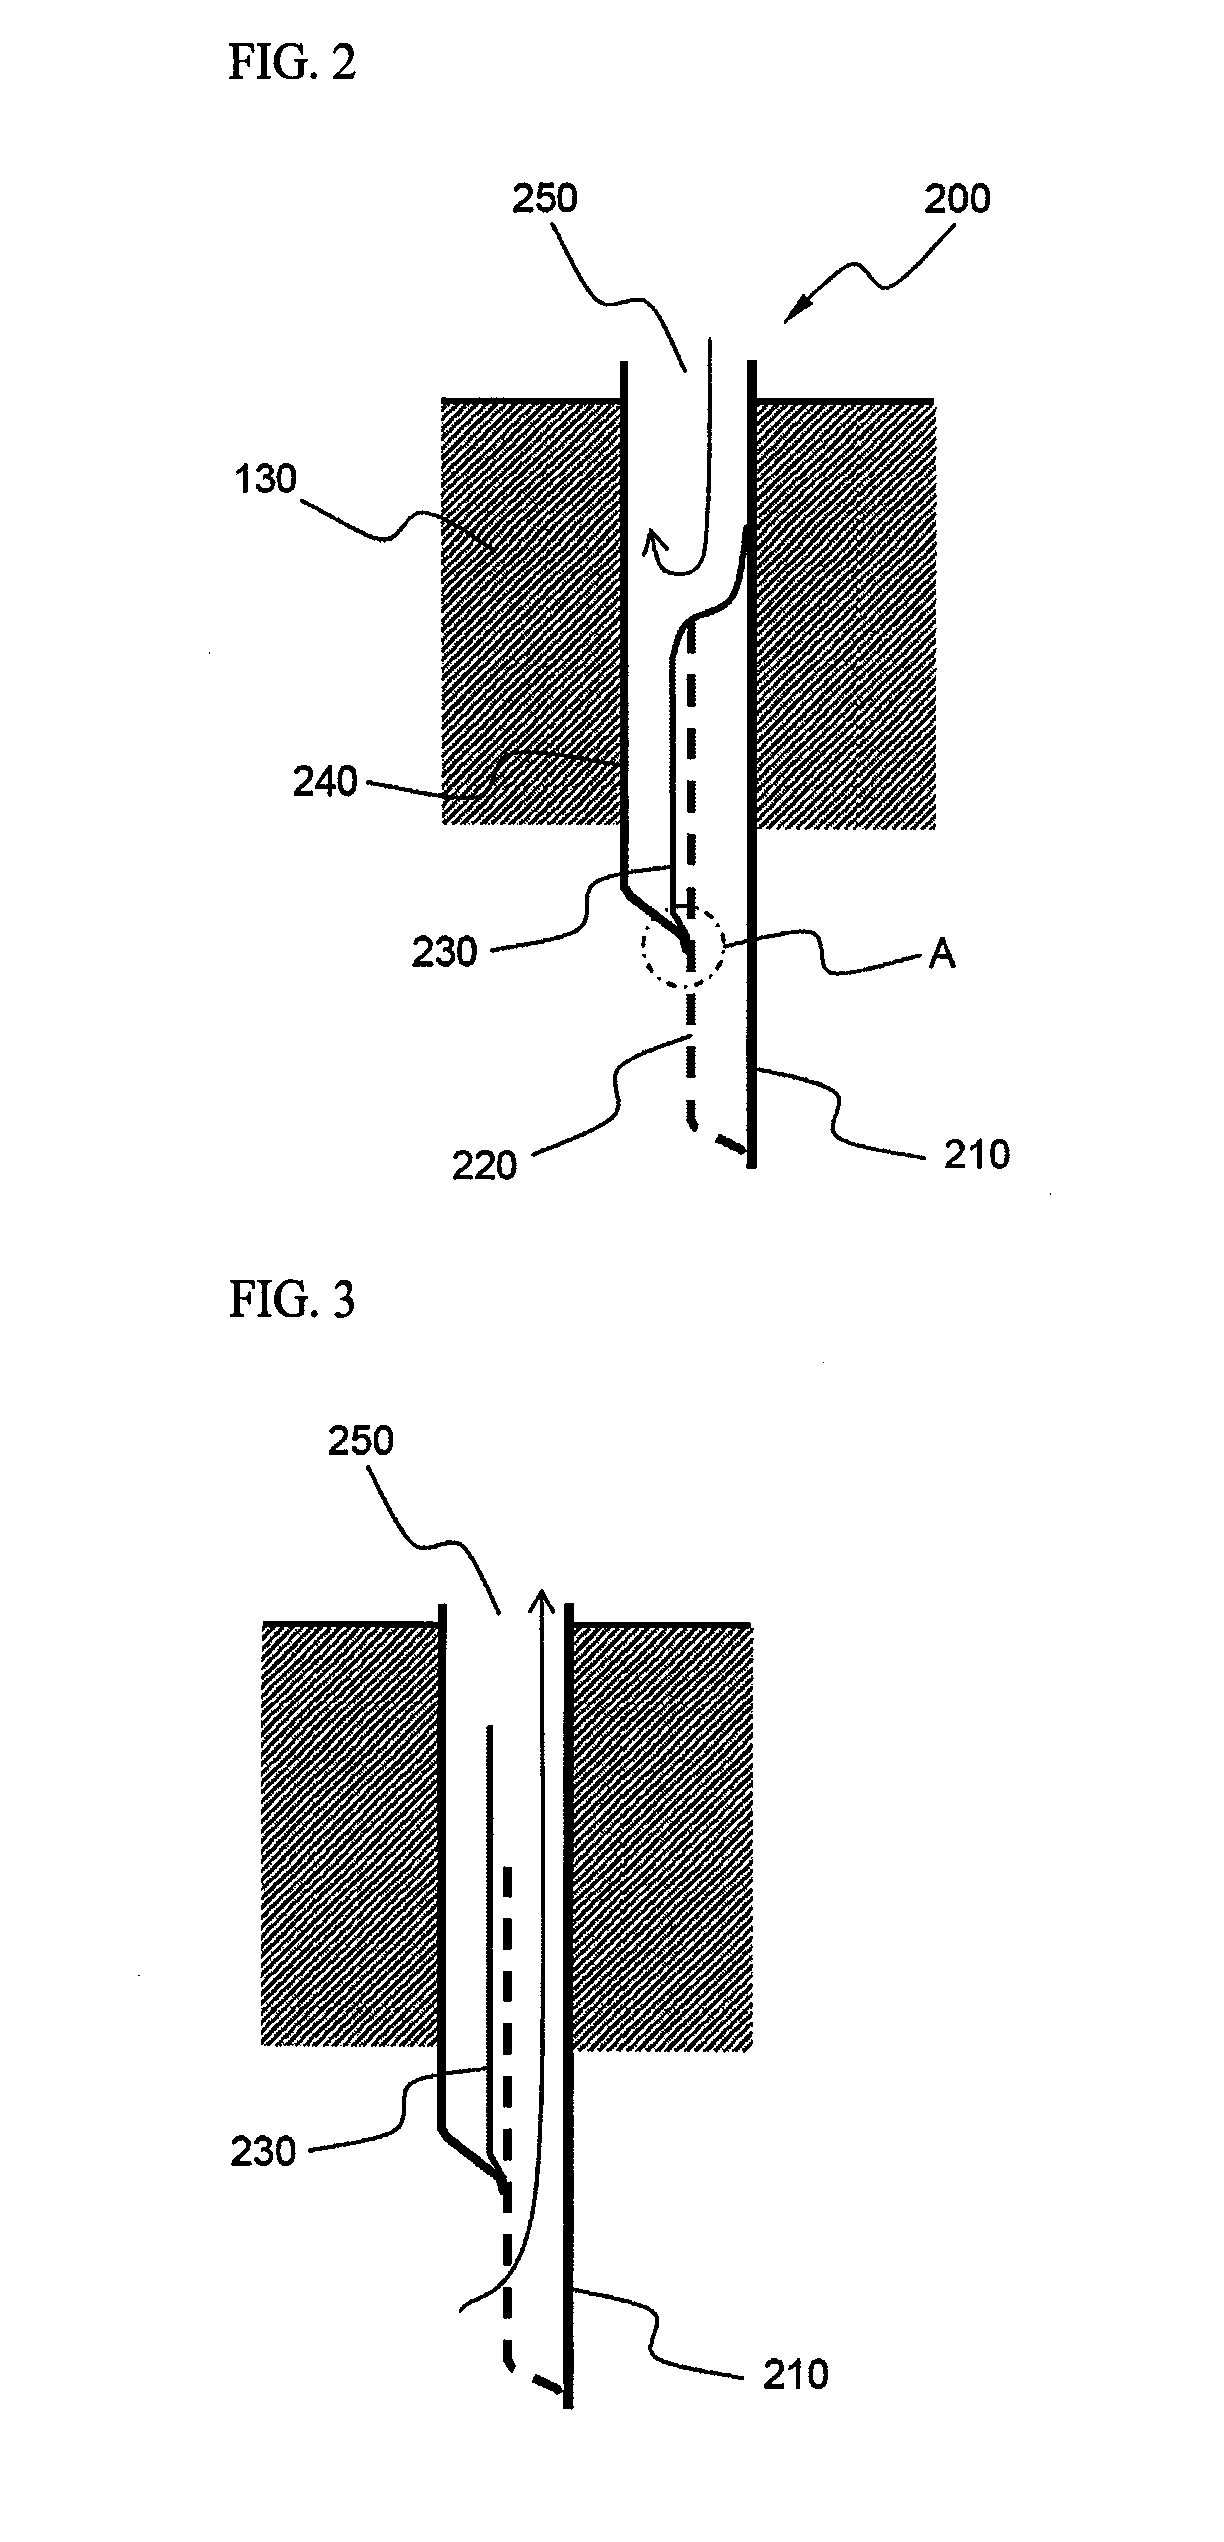 Secondary battery including one-way exhaust valve